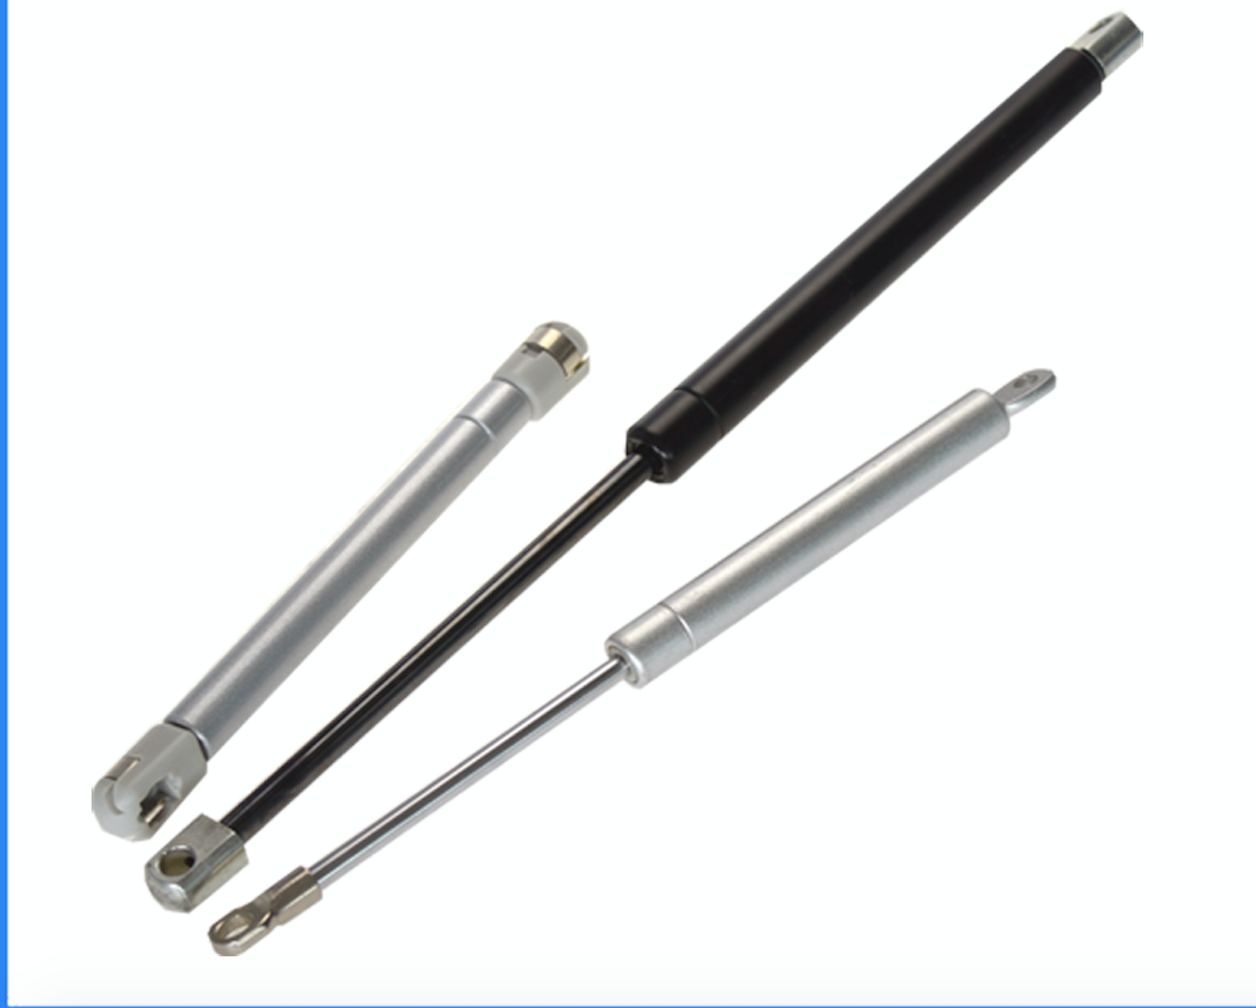 Adjustable and lockable gas spring for furniture and automotive